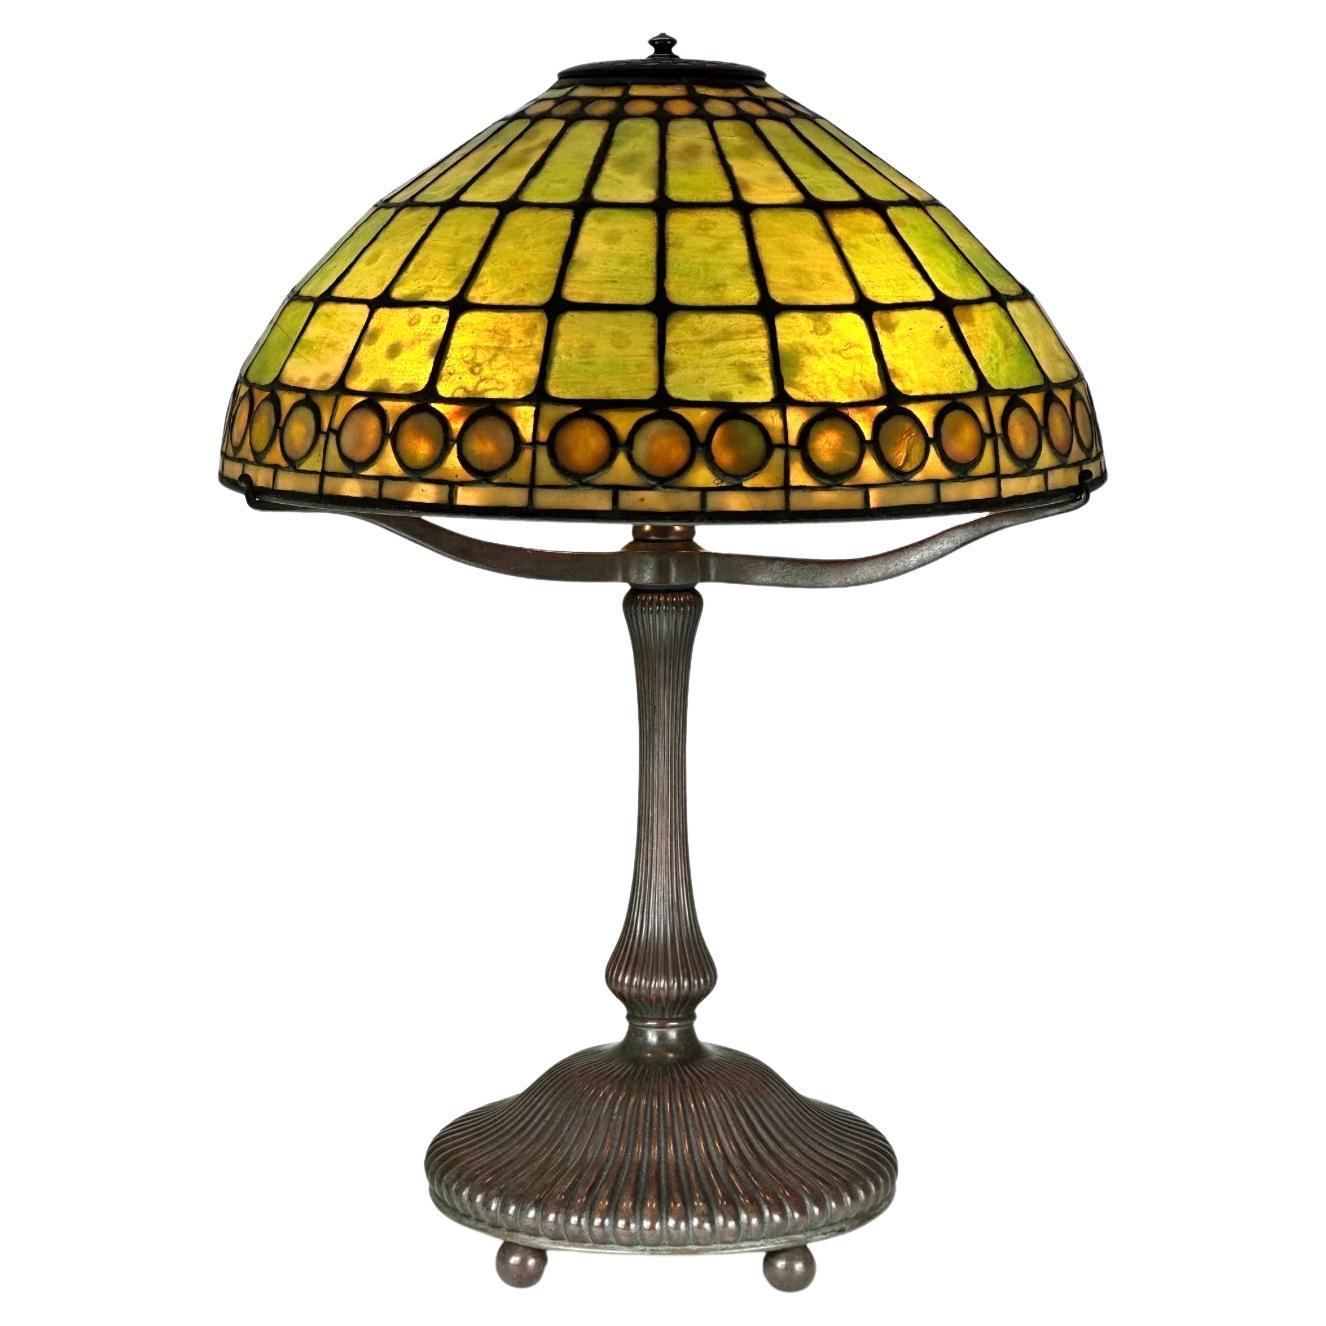 Tiffany Studios Jeweled Colonial Table Lamp For Sale